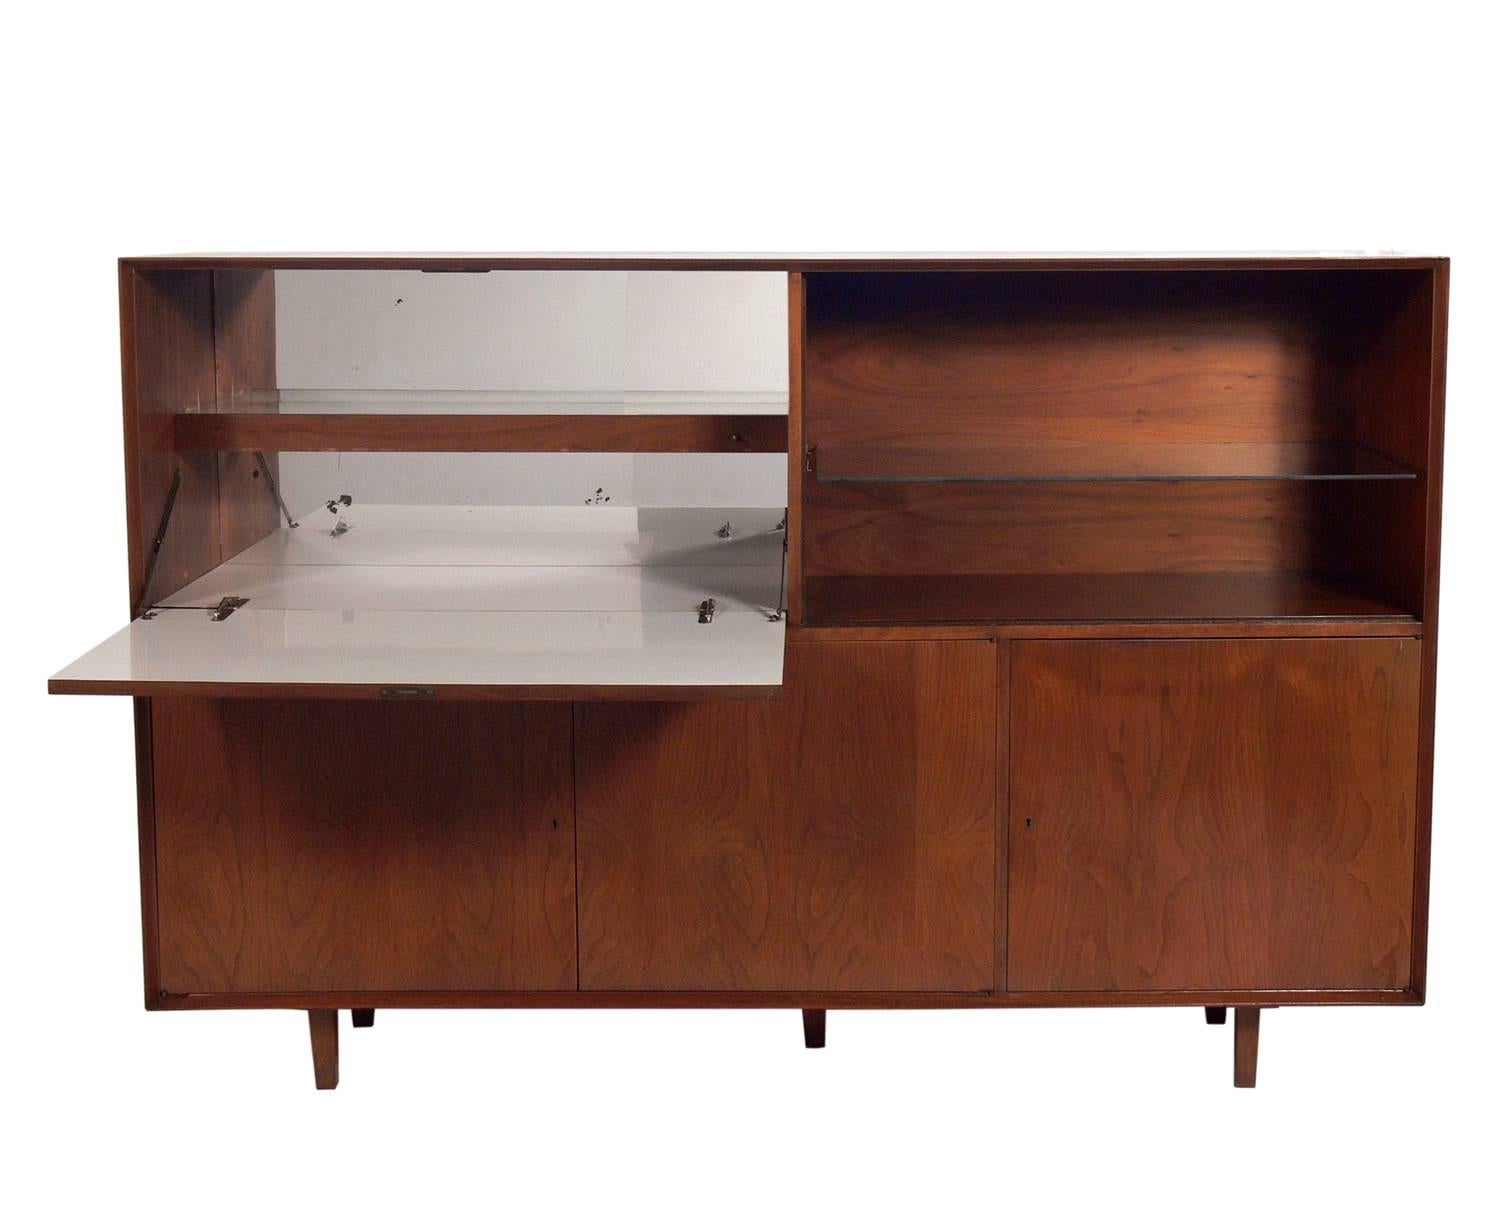 Large-scale midcentury bar cabinet or credenza, probably American, circa 1960s. Beautiful graining to the walnut. This piece is a versatile size and can be used as a bar cabinet, credenza, desk, secretary, or media cabinet in a living area, or as a